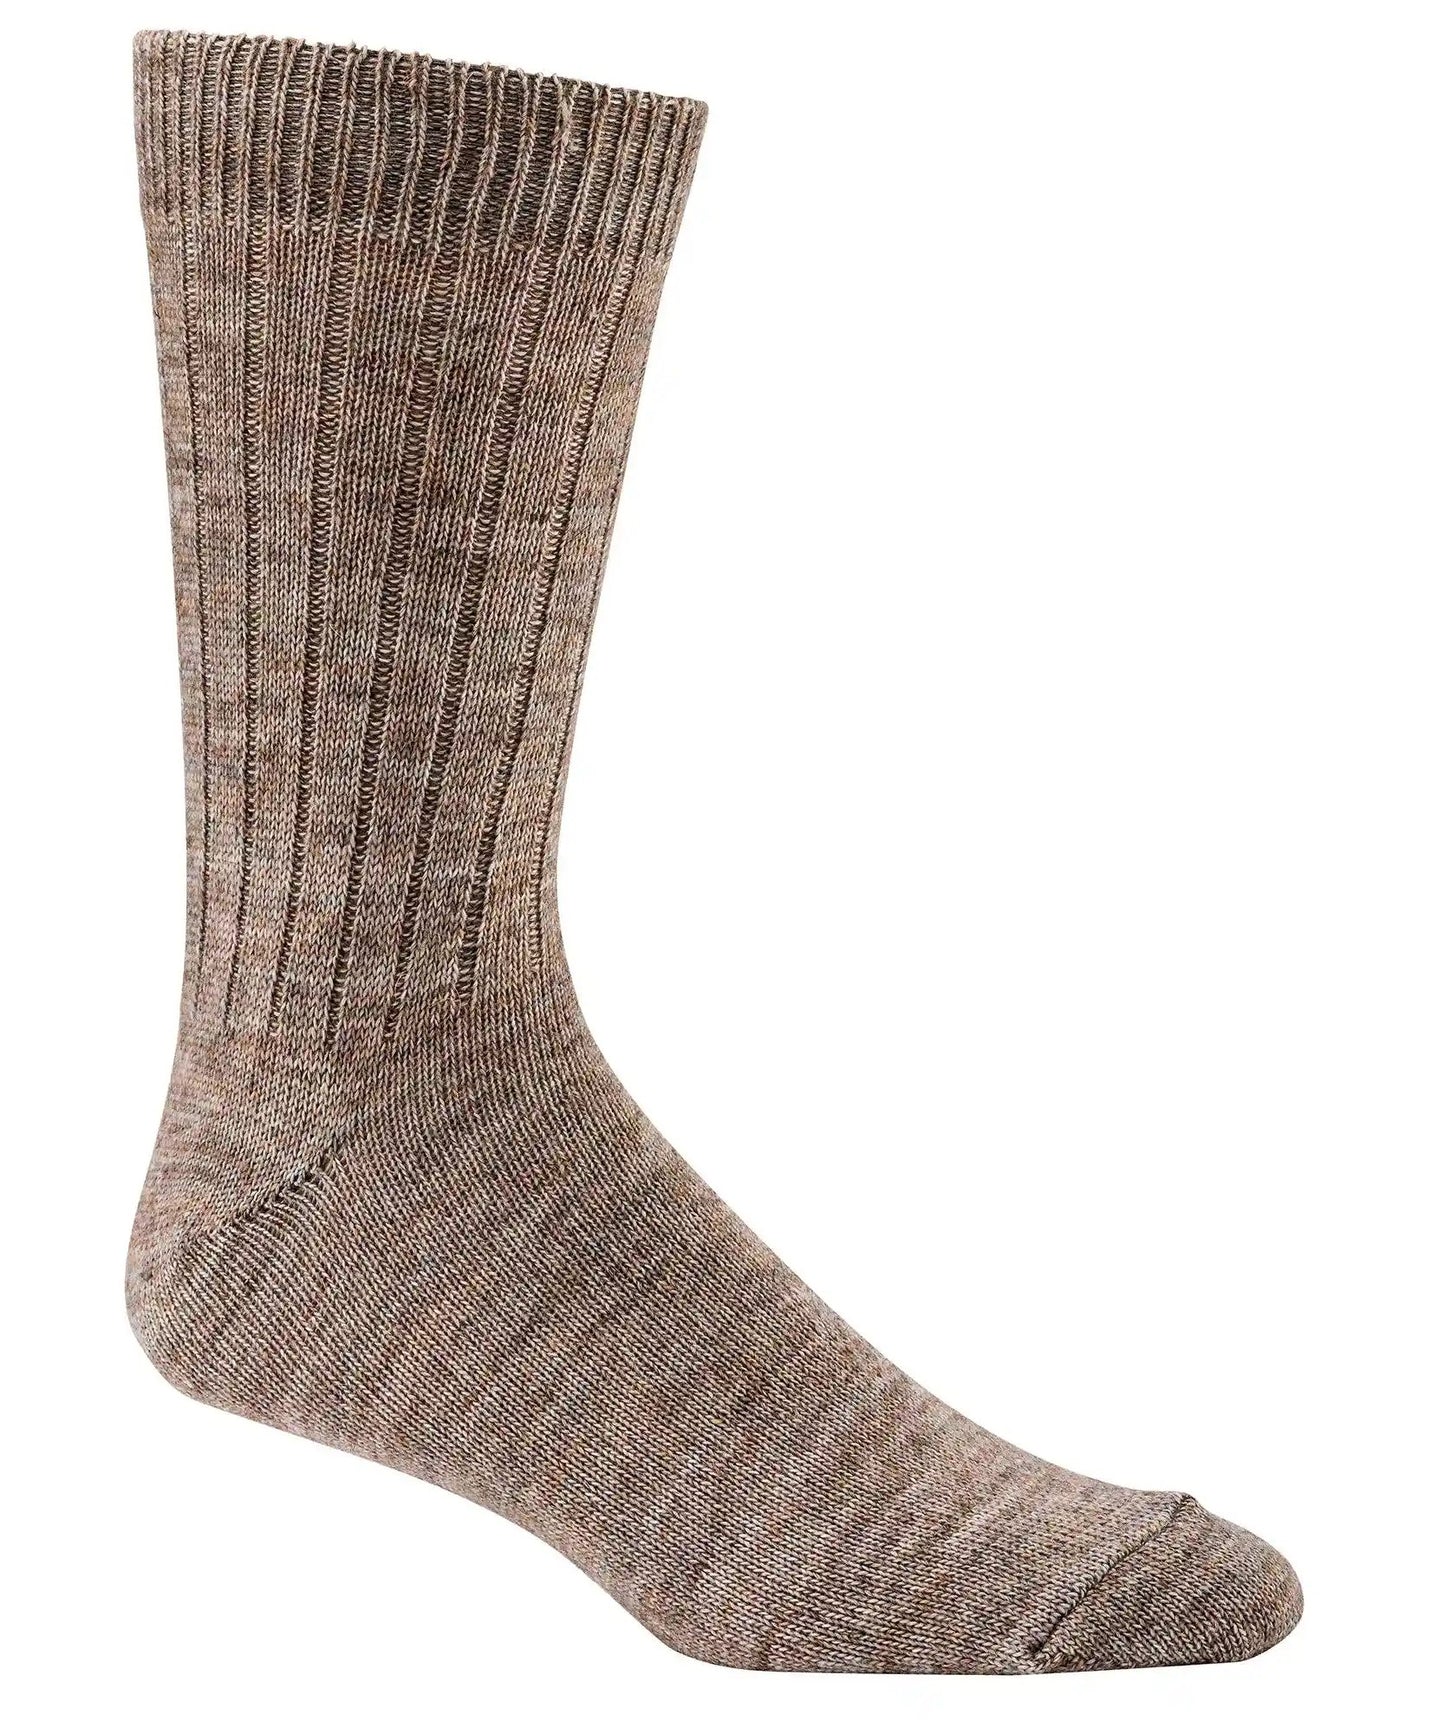 2 or 4 pairs of warm wool socks with alpaca wool and sheep wool for men and women